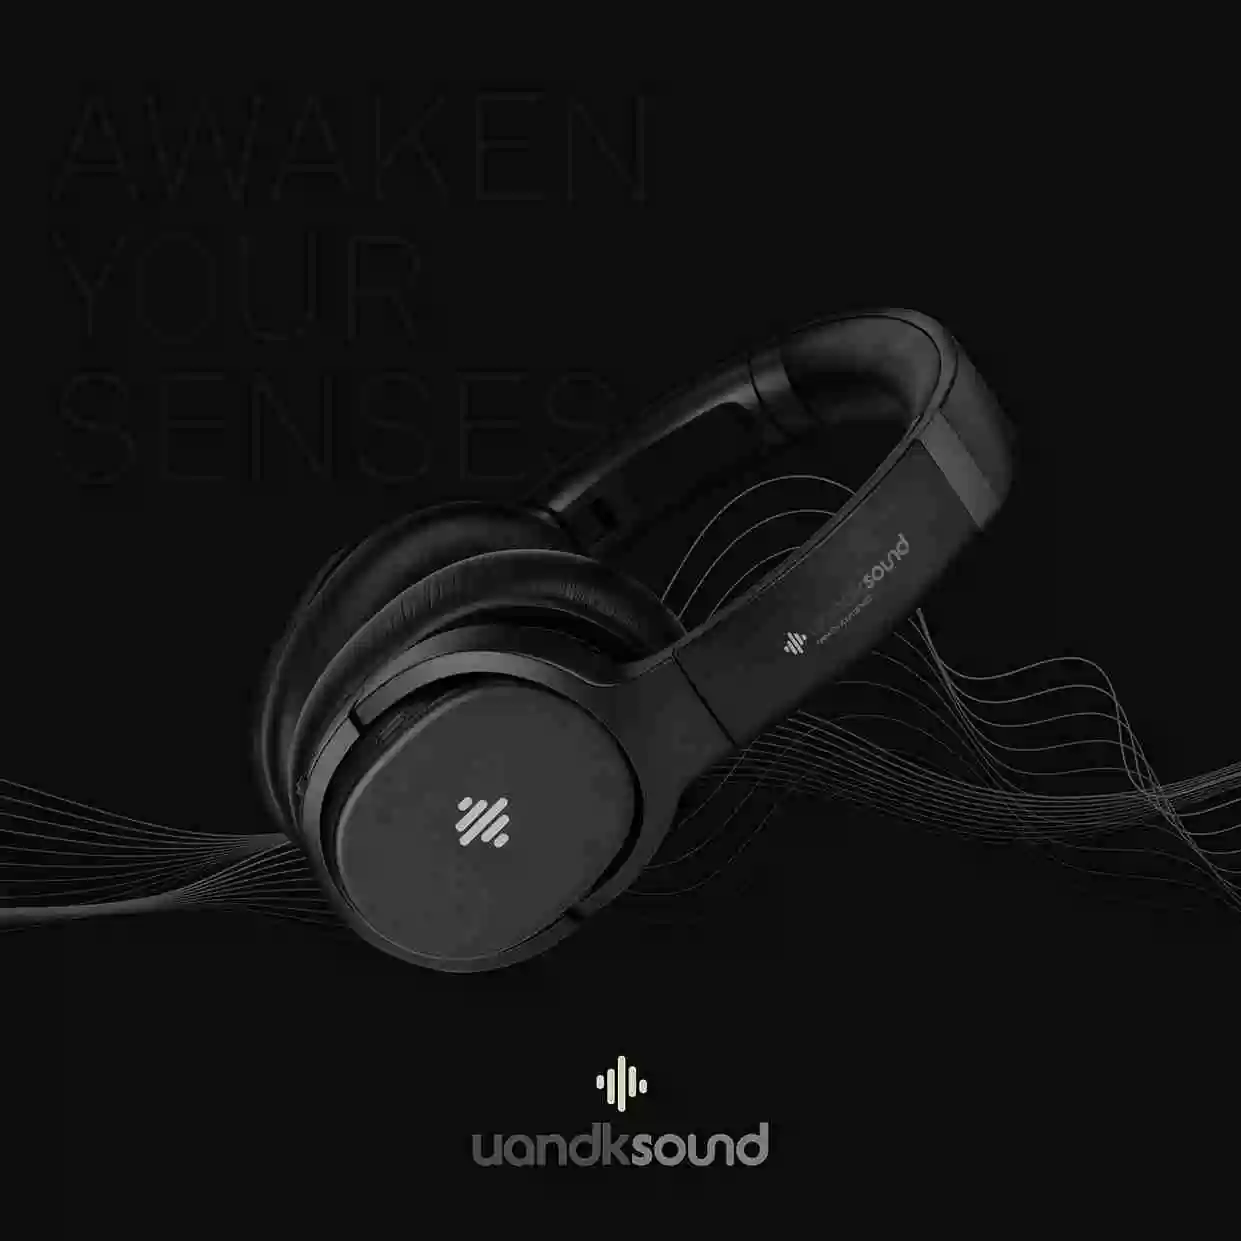 London & Oxford headphones by Uandksound